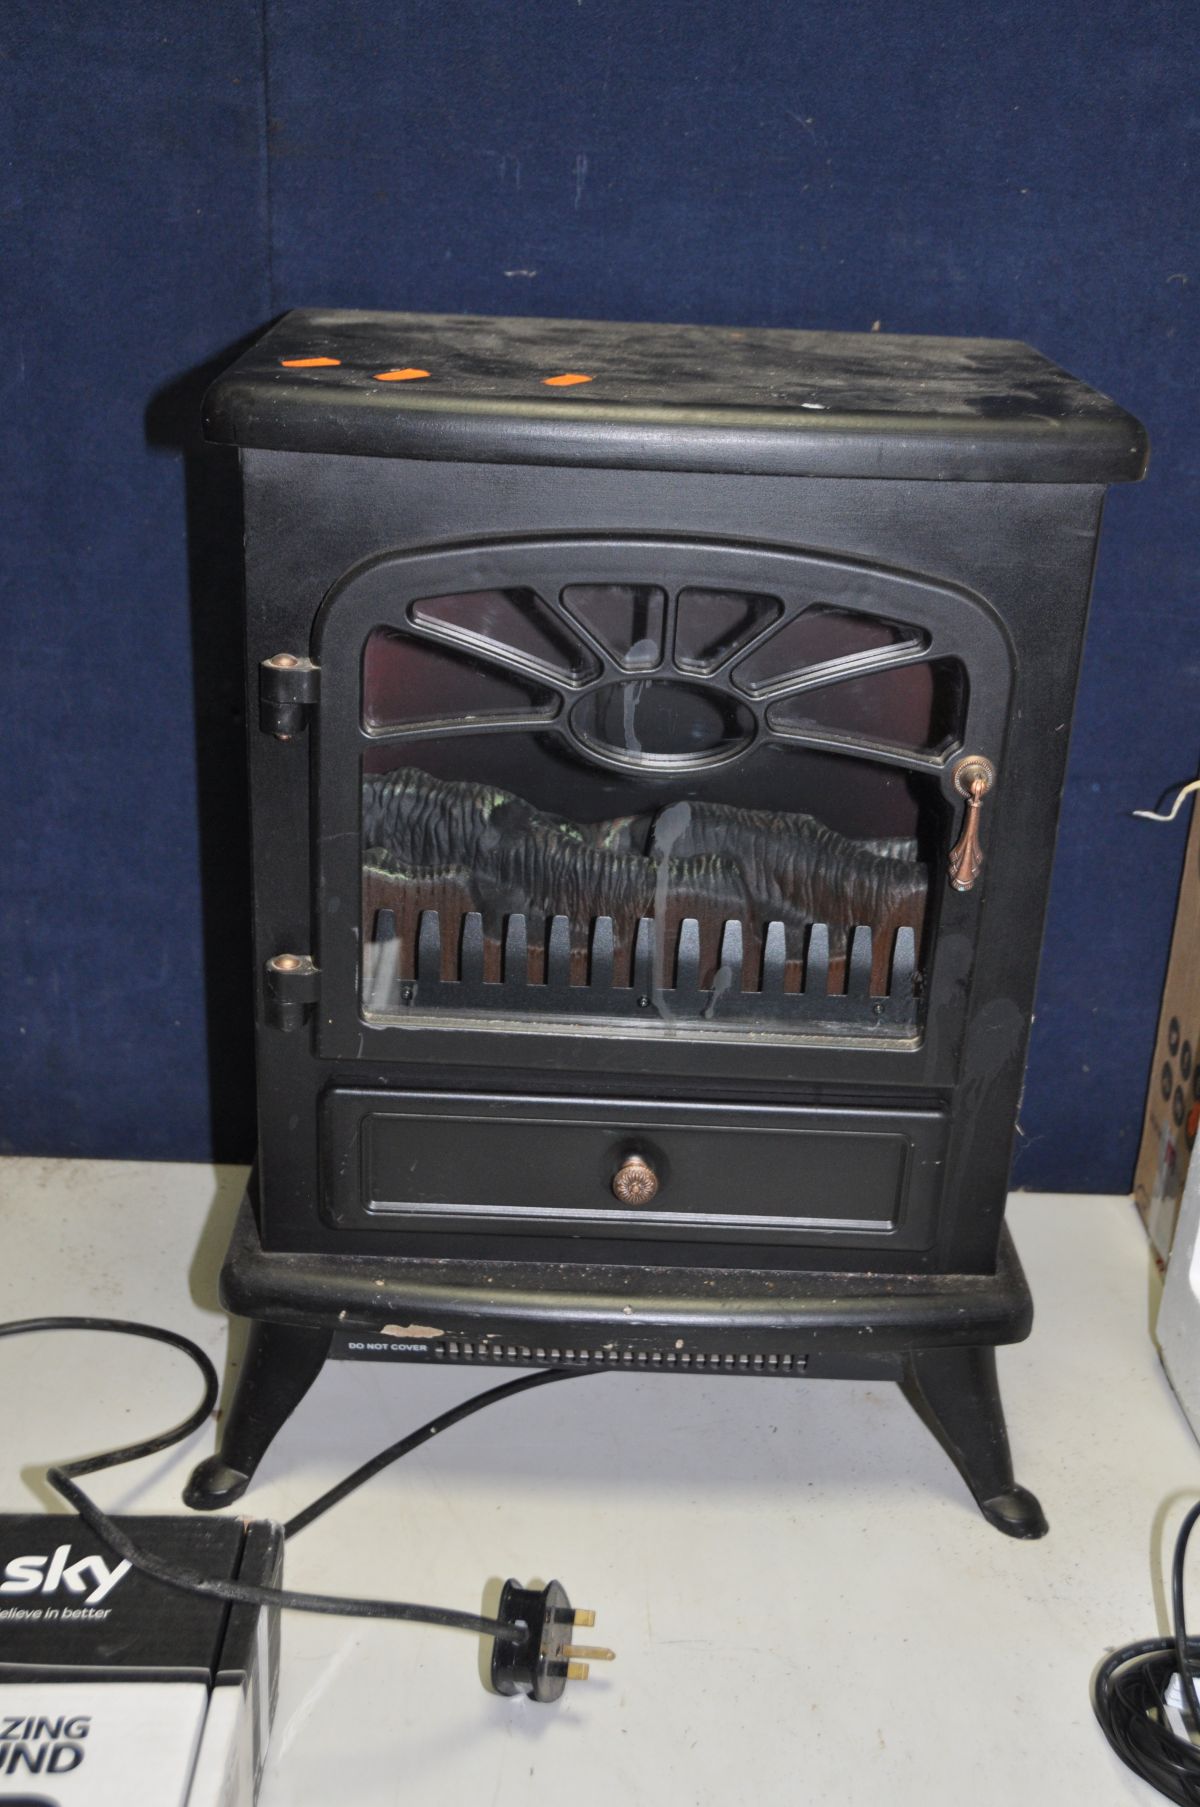 AN UNBRANDED LOG BURNER STYLE FAN HEATER, a brand new in box Duronic electric heater (PAT not - Image 3 of 4